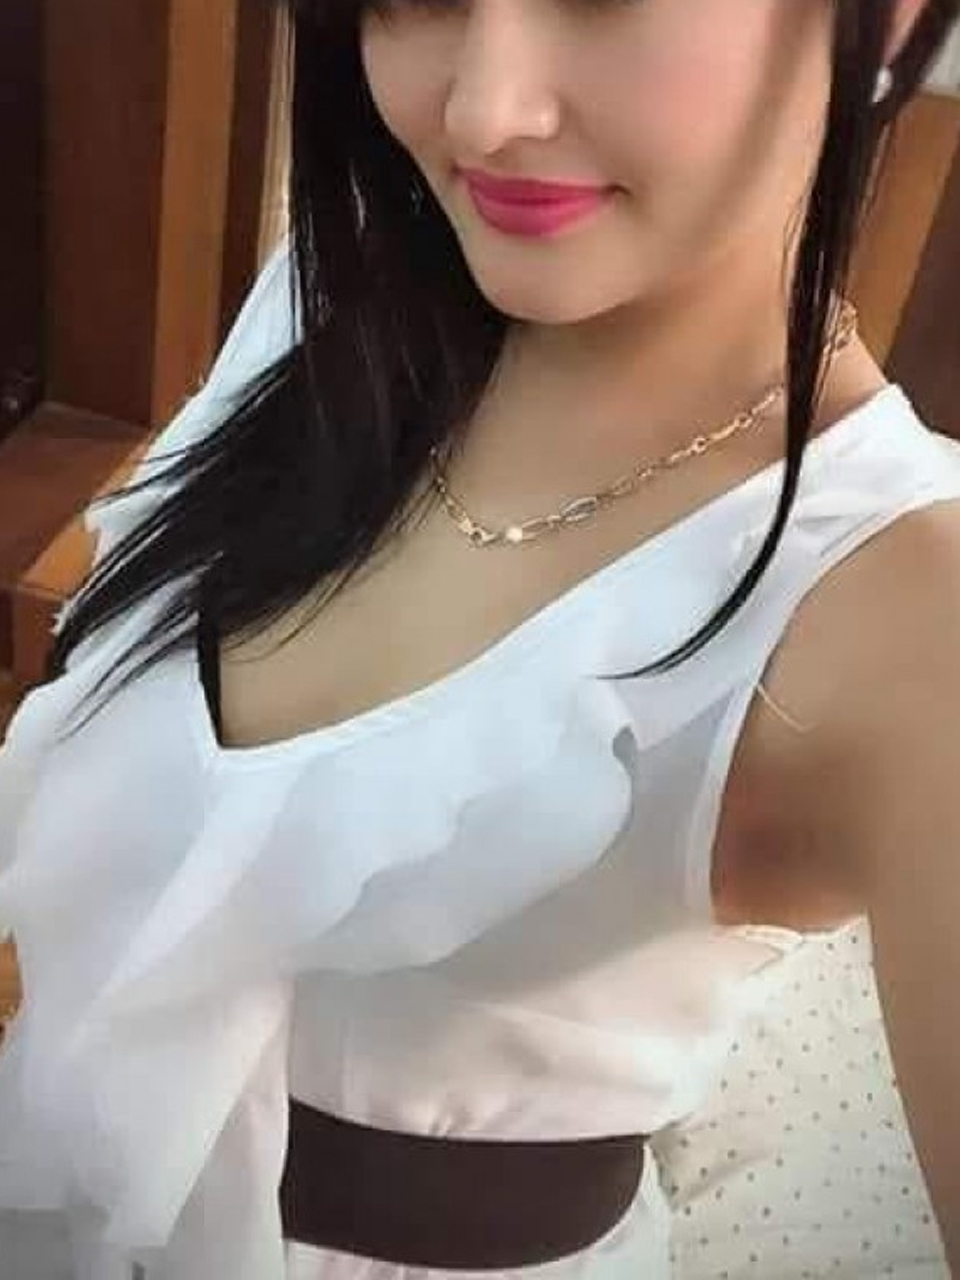 Call Girls Number in Chandigarh